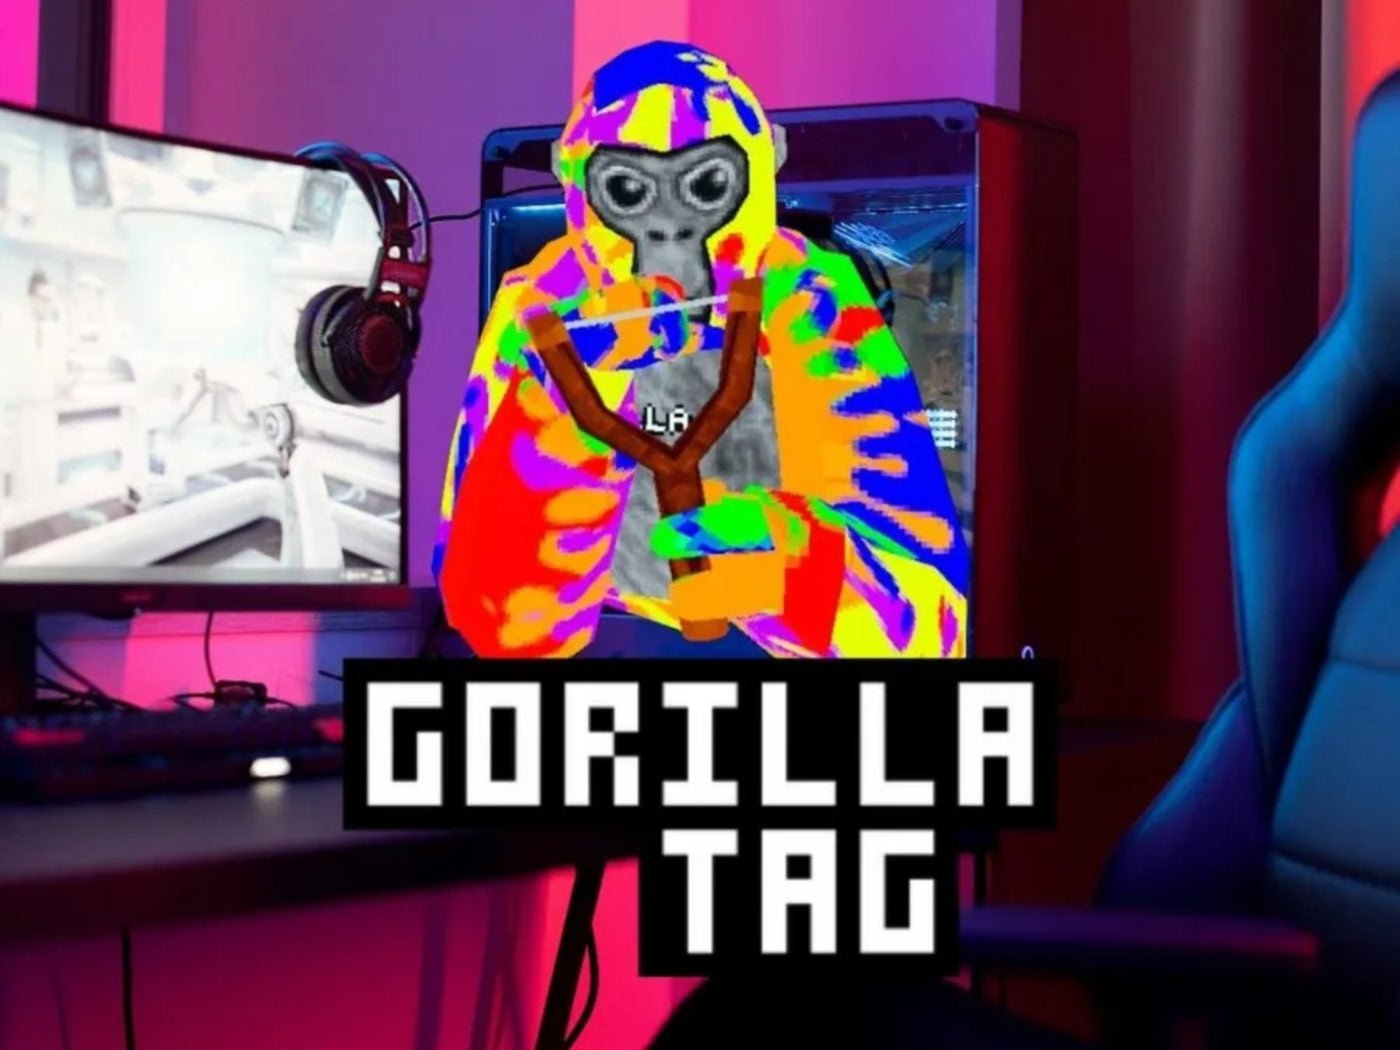 How To Customize Your Gorilla Name And Color In Gorilla Tag